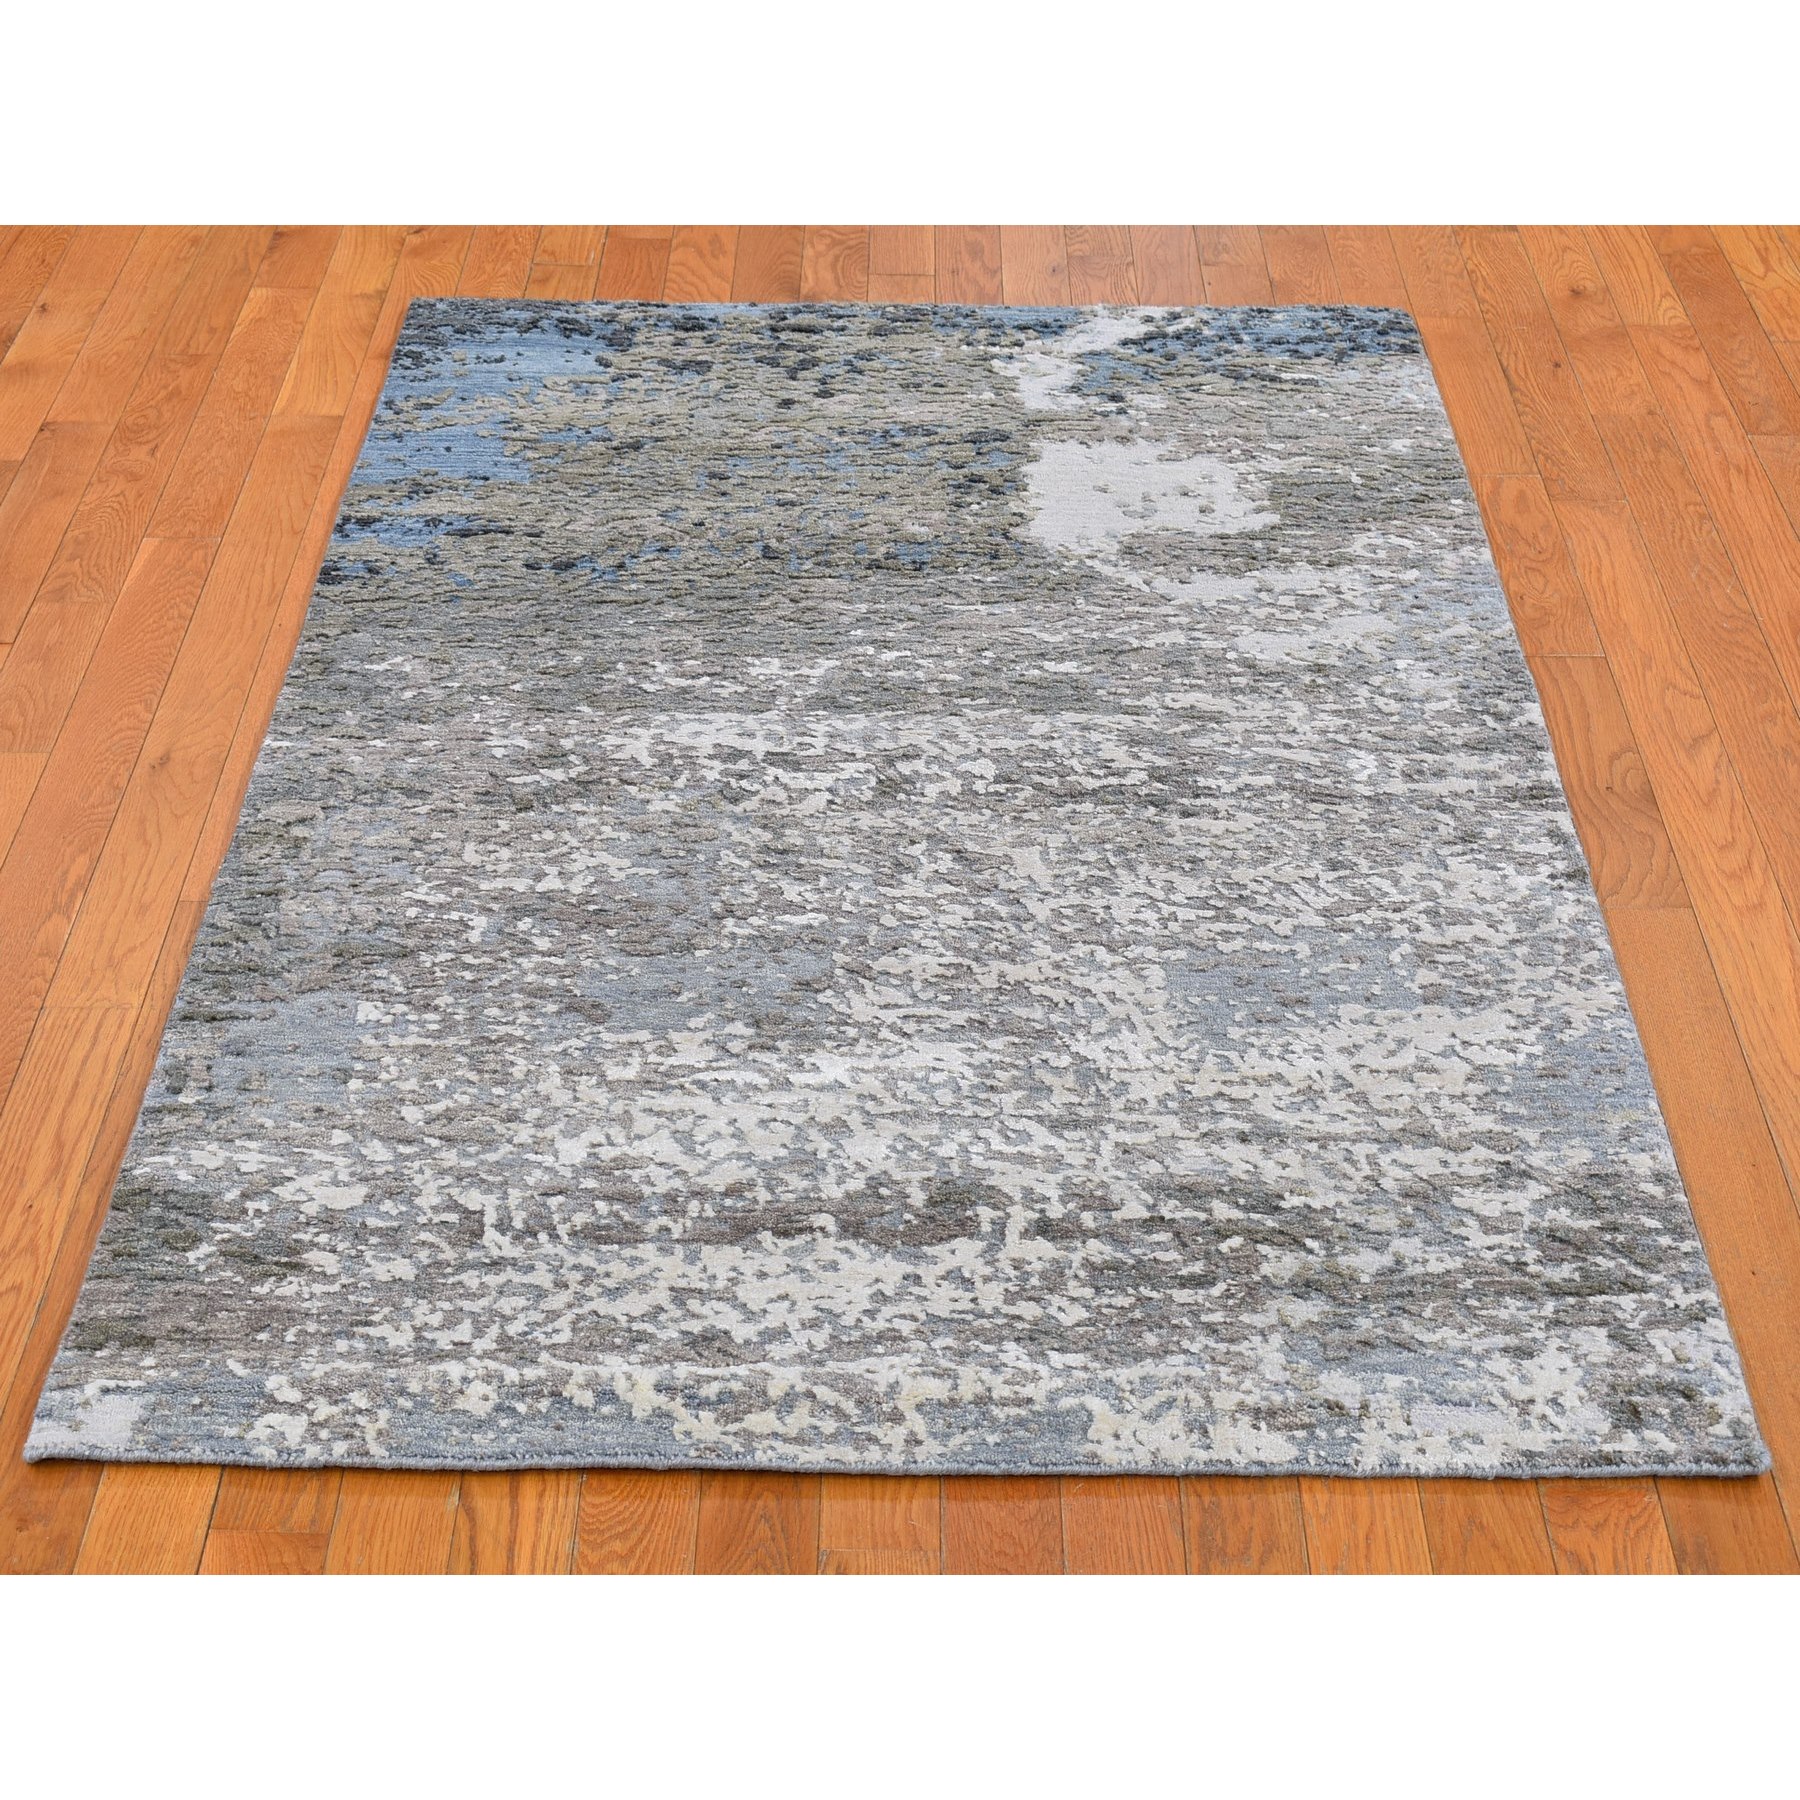 4'x6' Blue Abstract Design Wool and Silk Hi-Low Pile Denser Weave Hand Woven Oriental Rug 